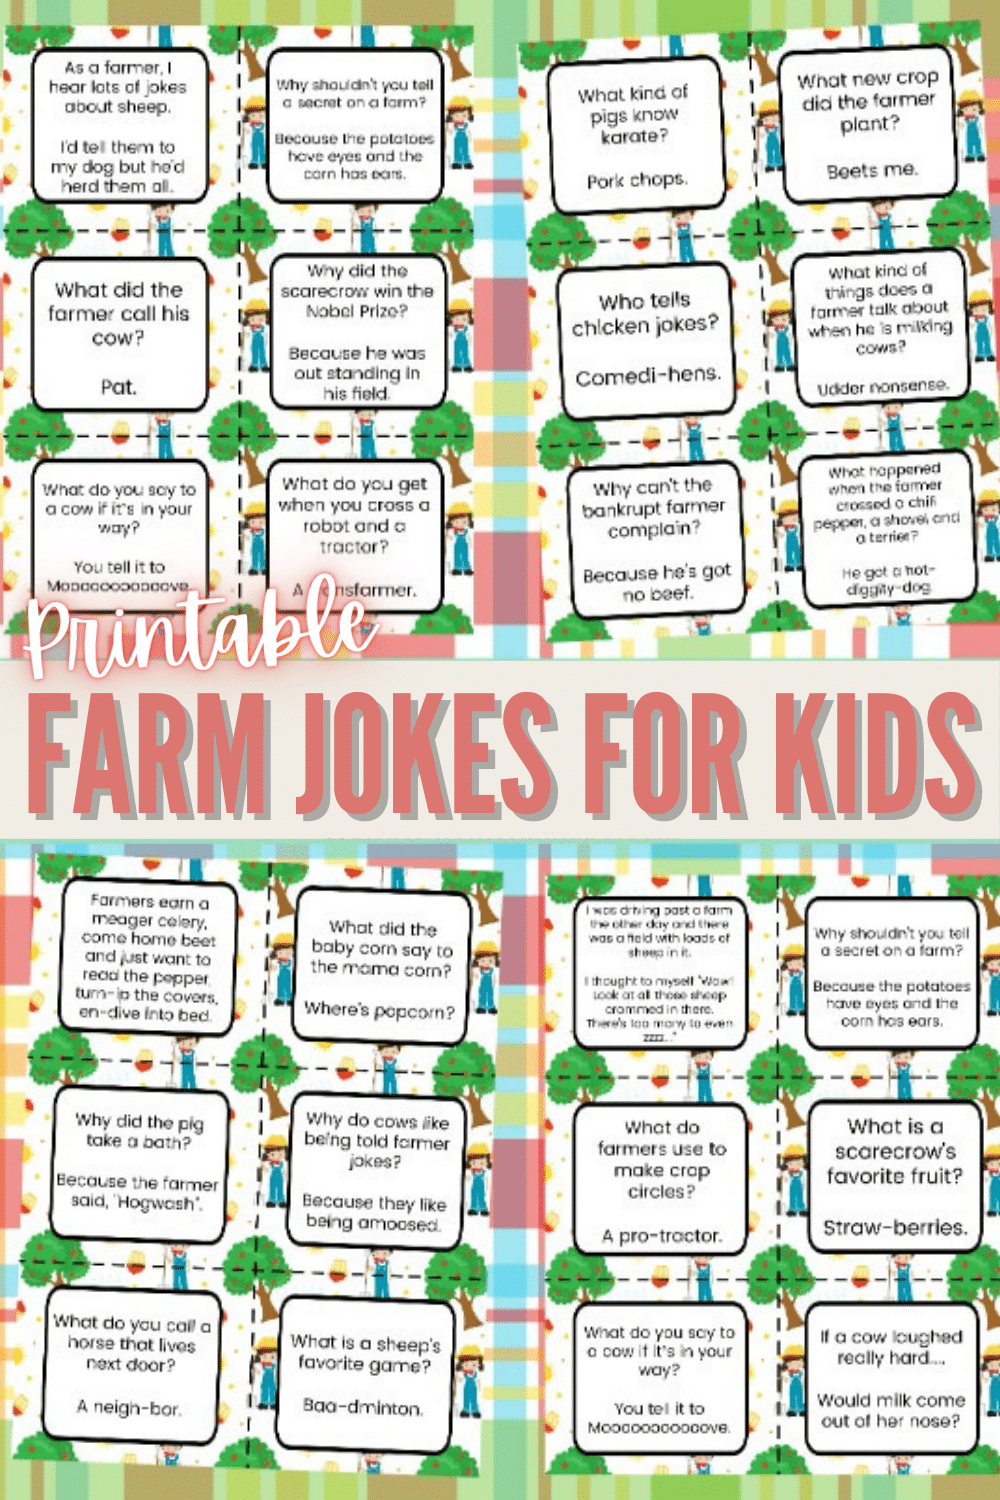 Printable farm jokes for kids are hilarious and perfect to put in school lunches or for your child to use for an at-home stand up comedy routine. #printables #jokesforkids #farming via @wondermomwannab